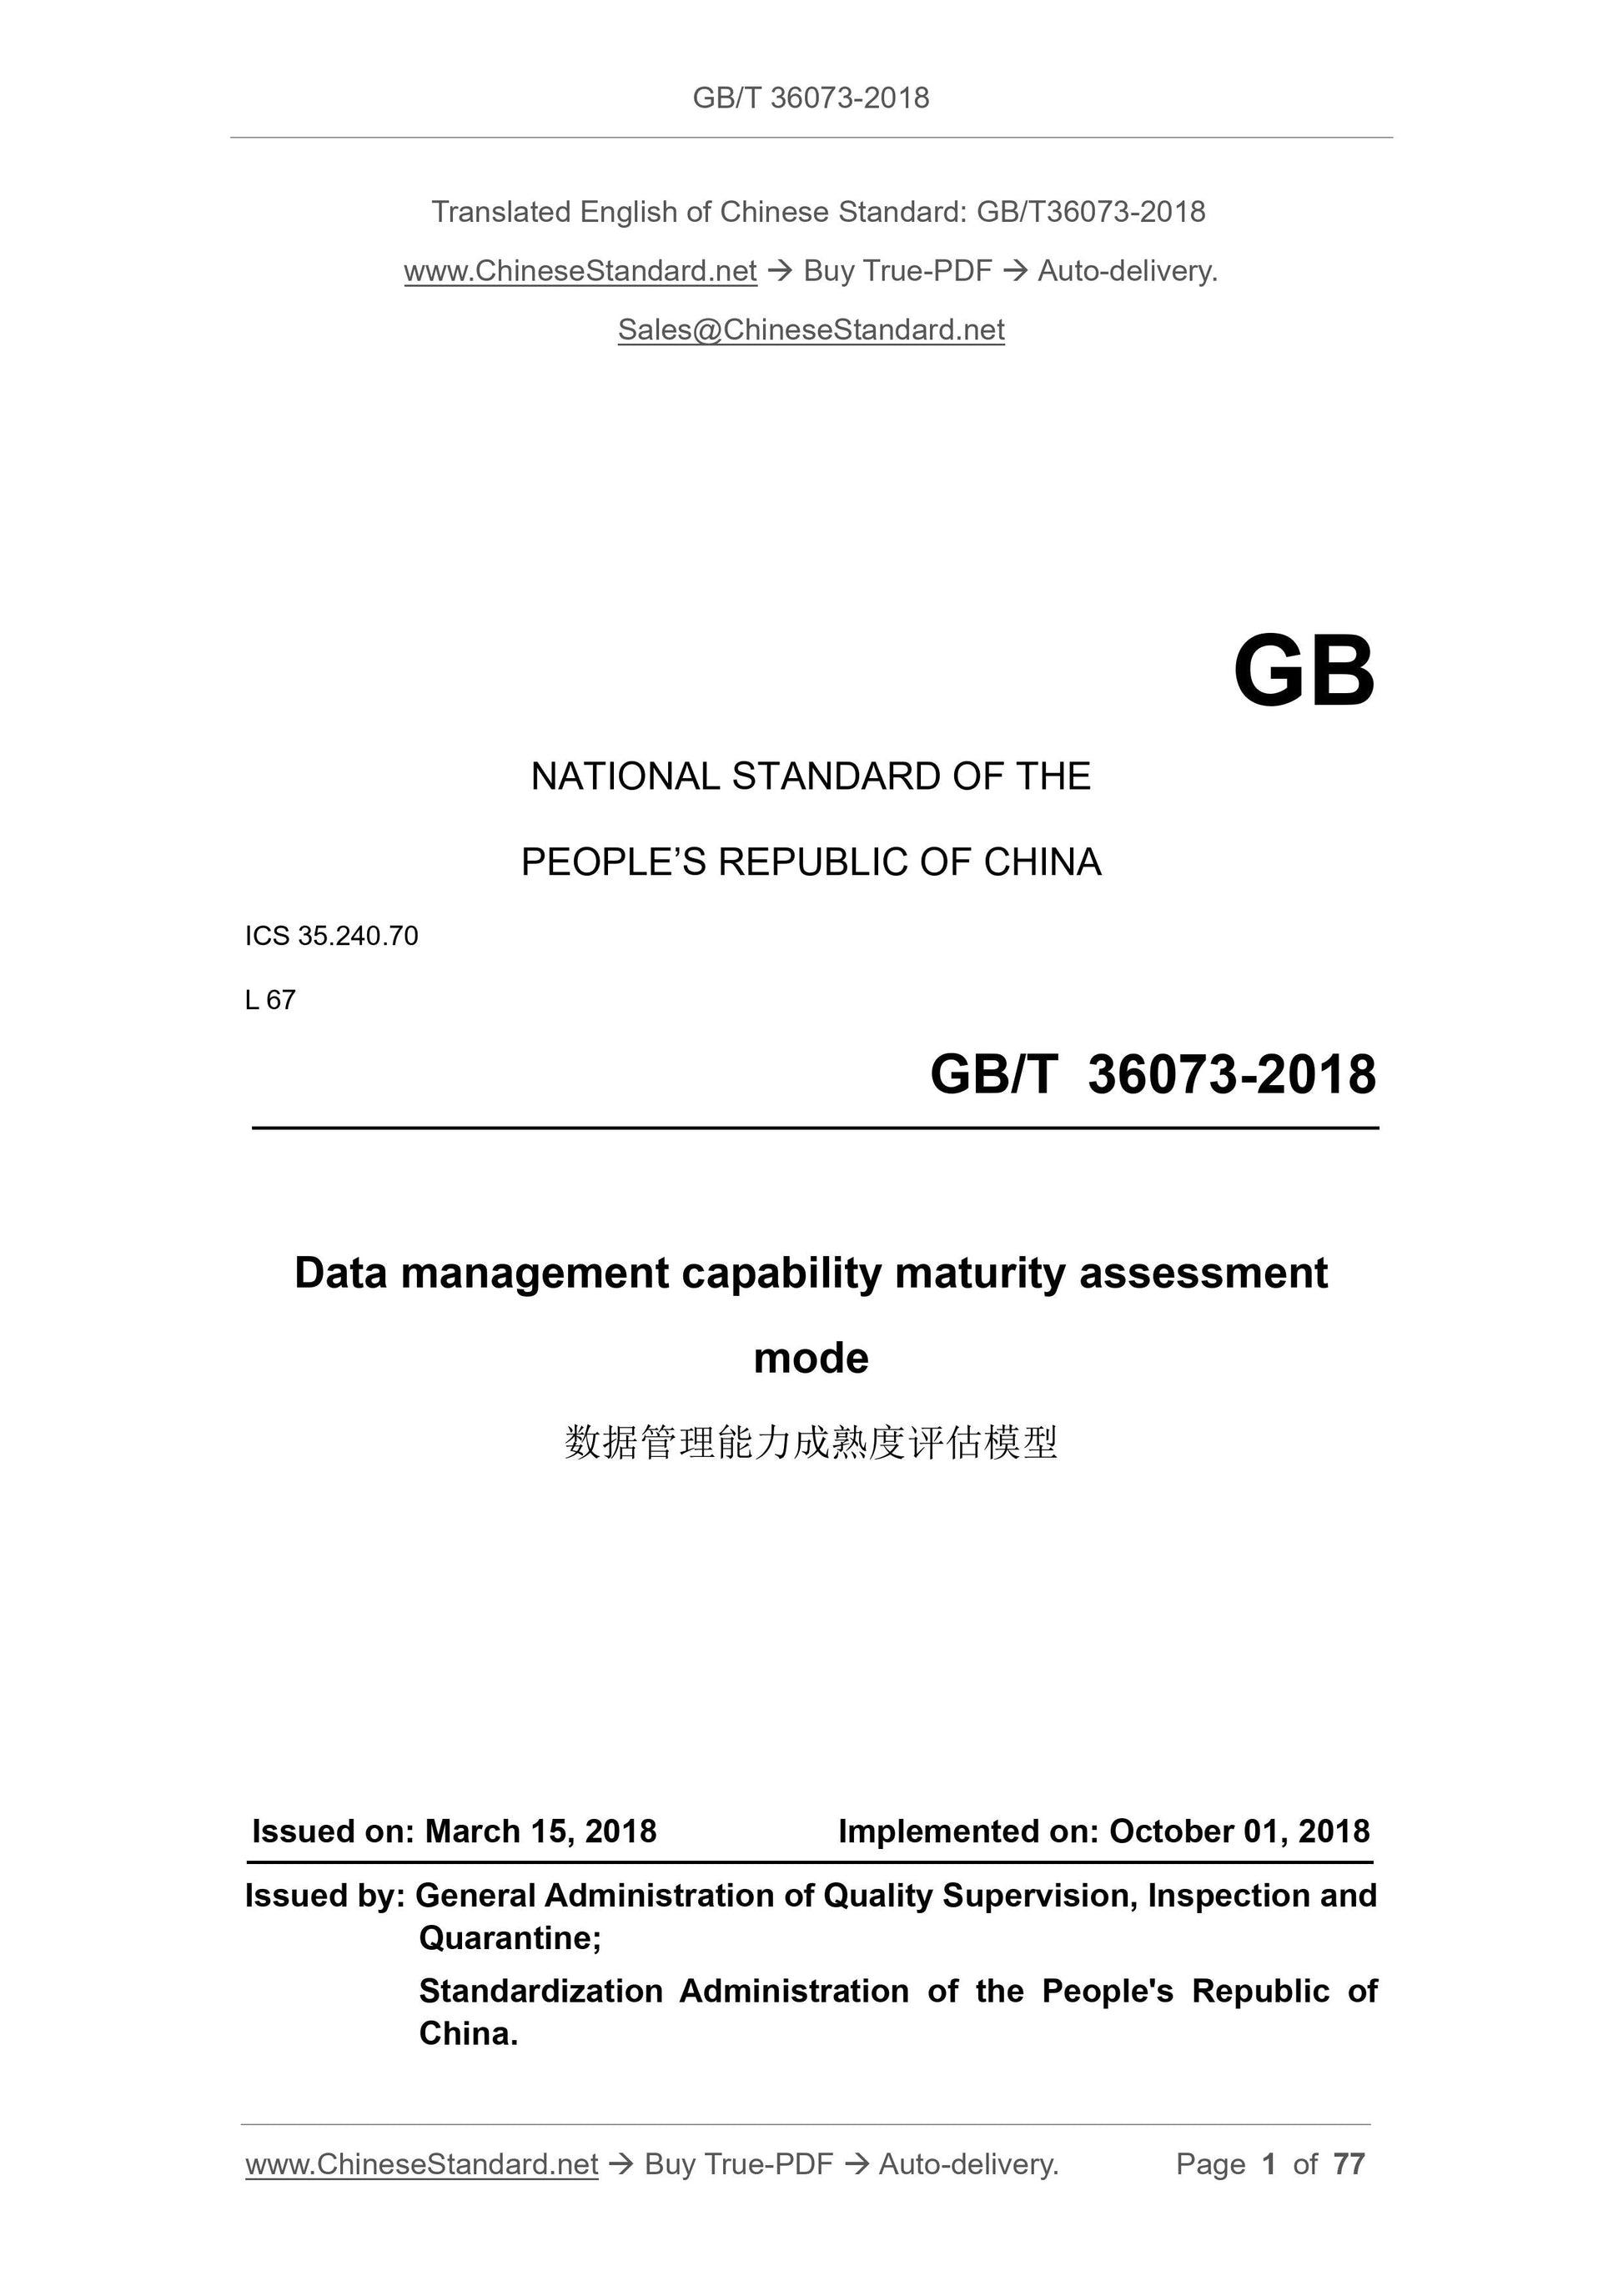 GB/T 36073-2018 Page 1